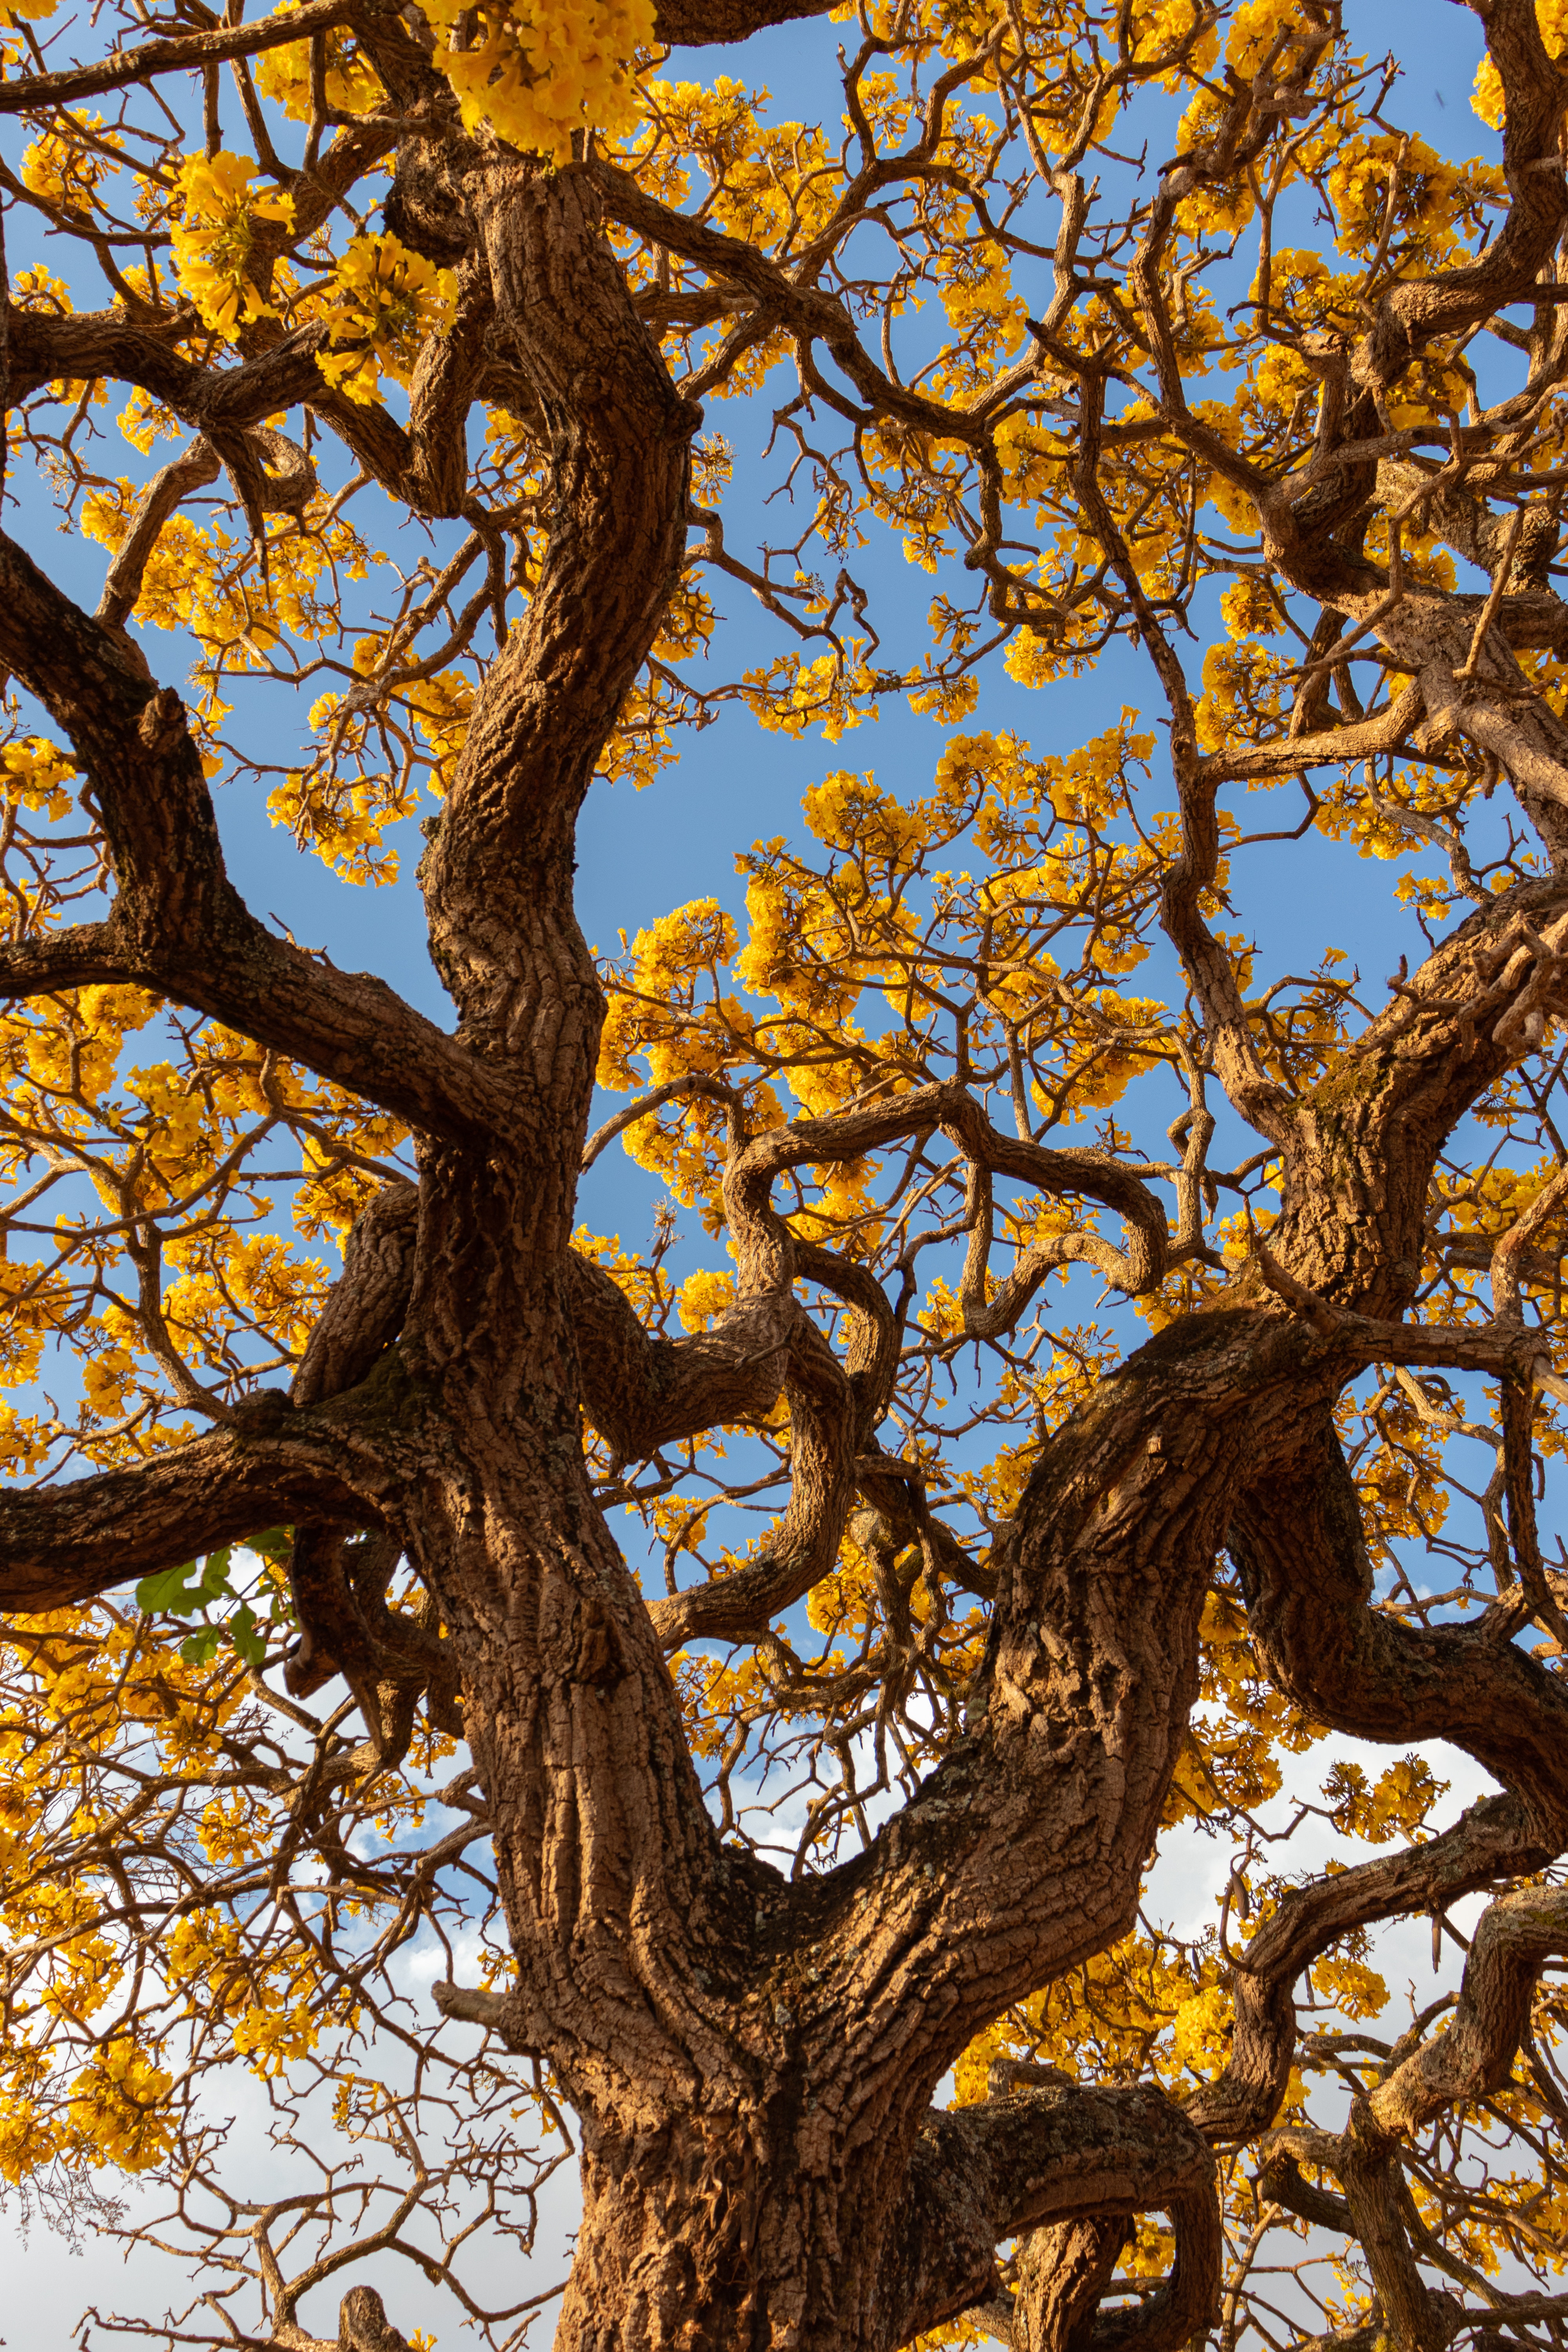 Yellow tree photos download the best free yellow tree stock photos hd images